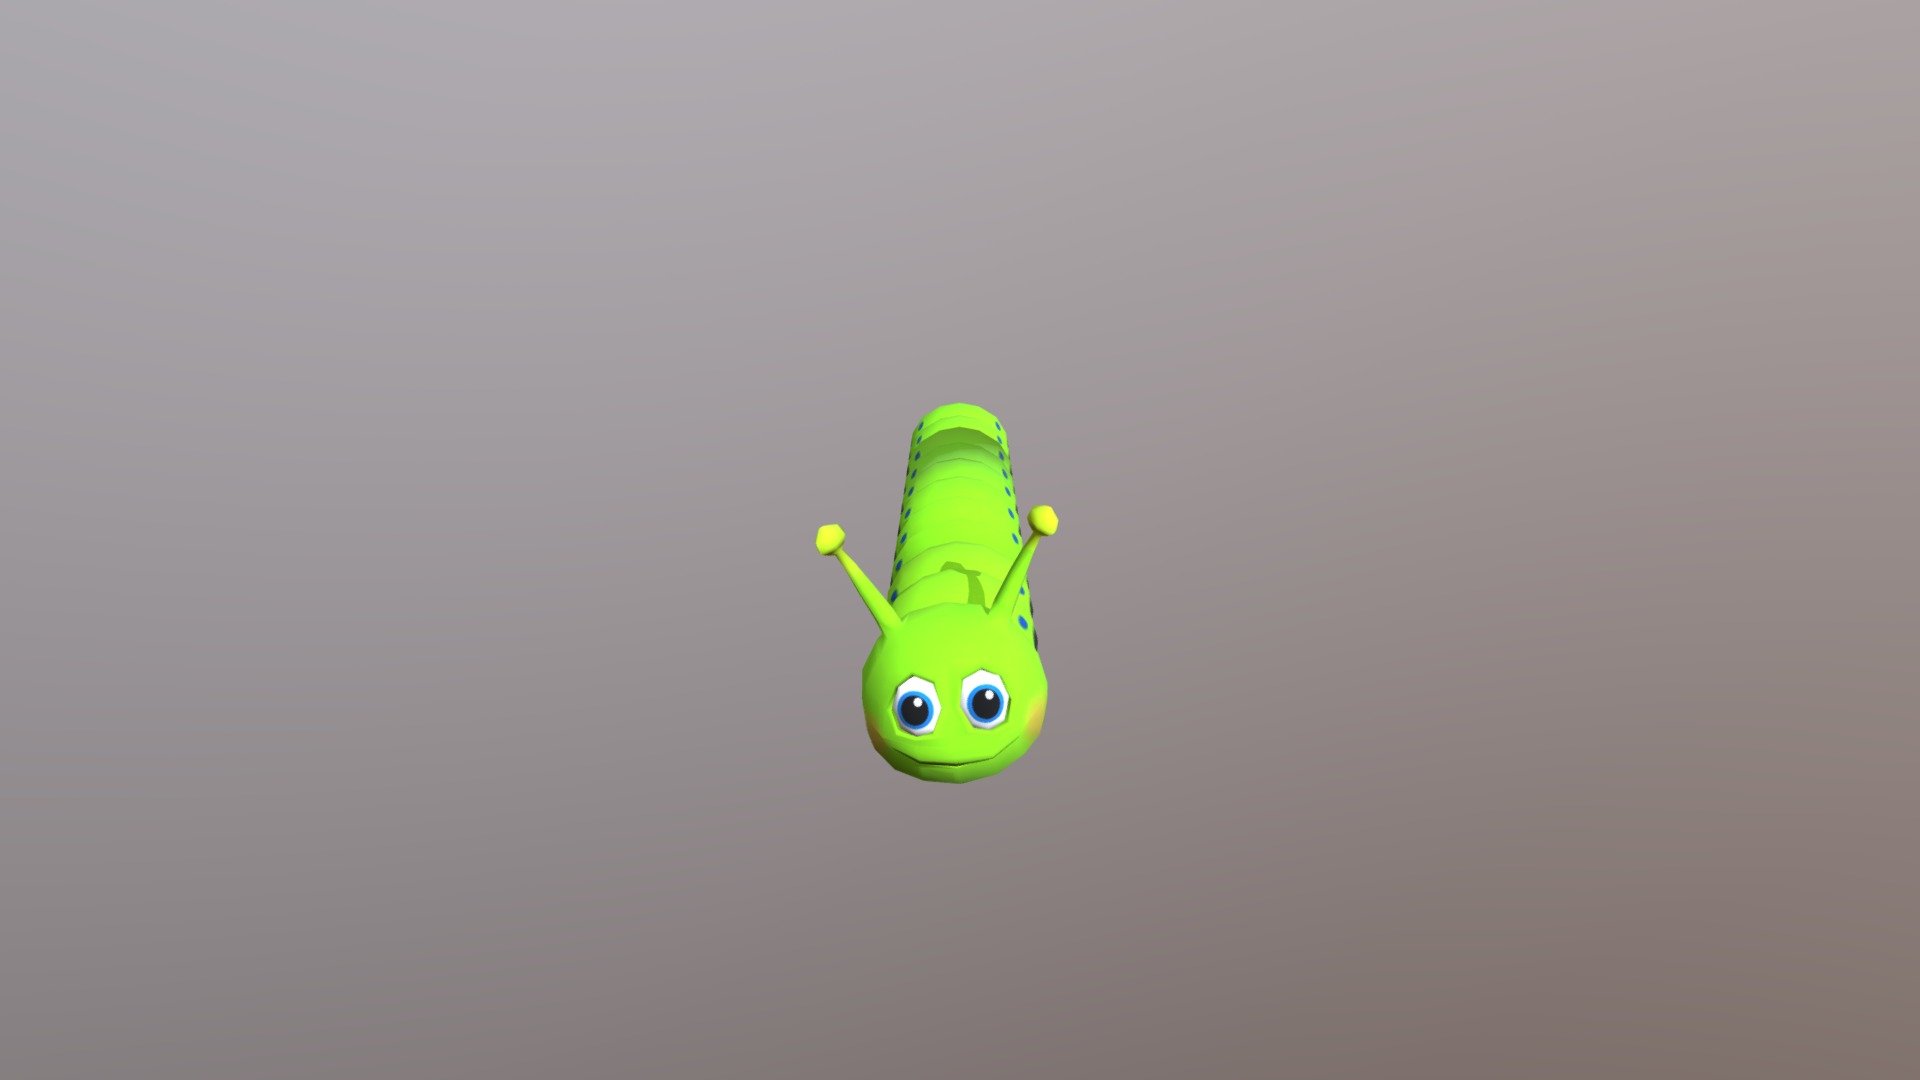 Caterpillar Crawl Animation V2 3d Model By Camcouto 63d2d7e Sketchfab